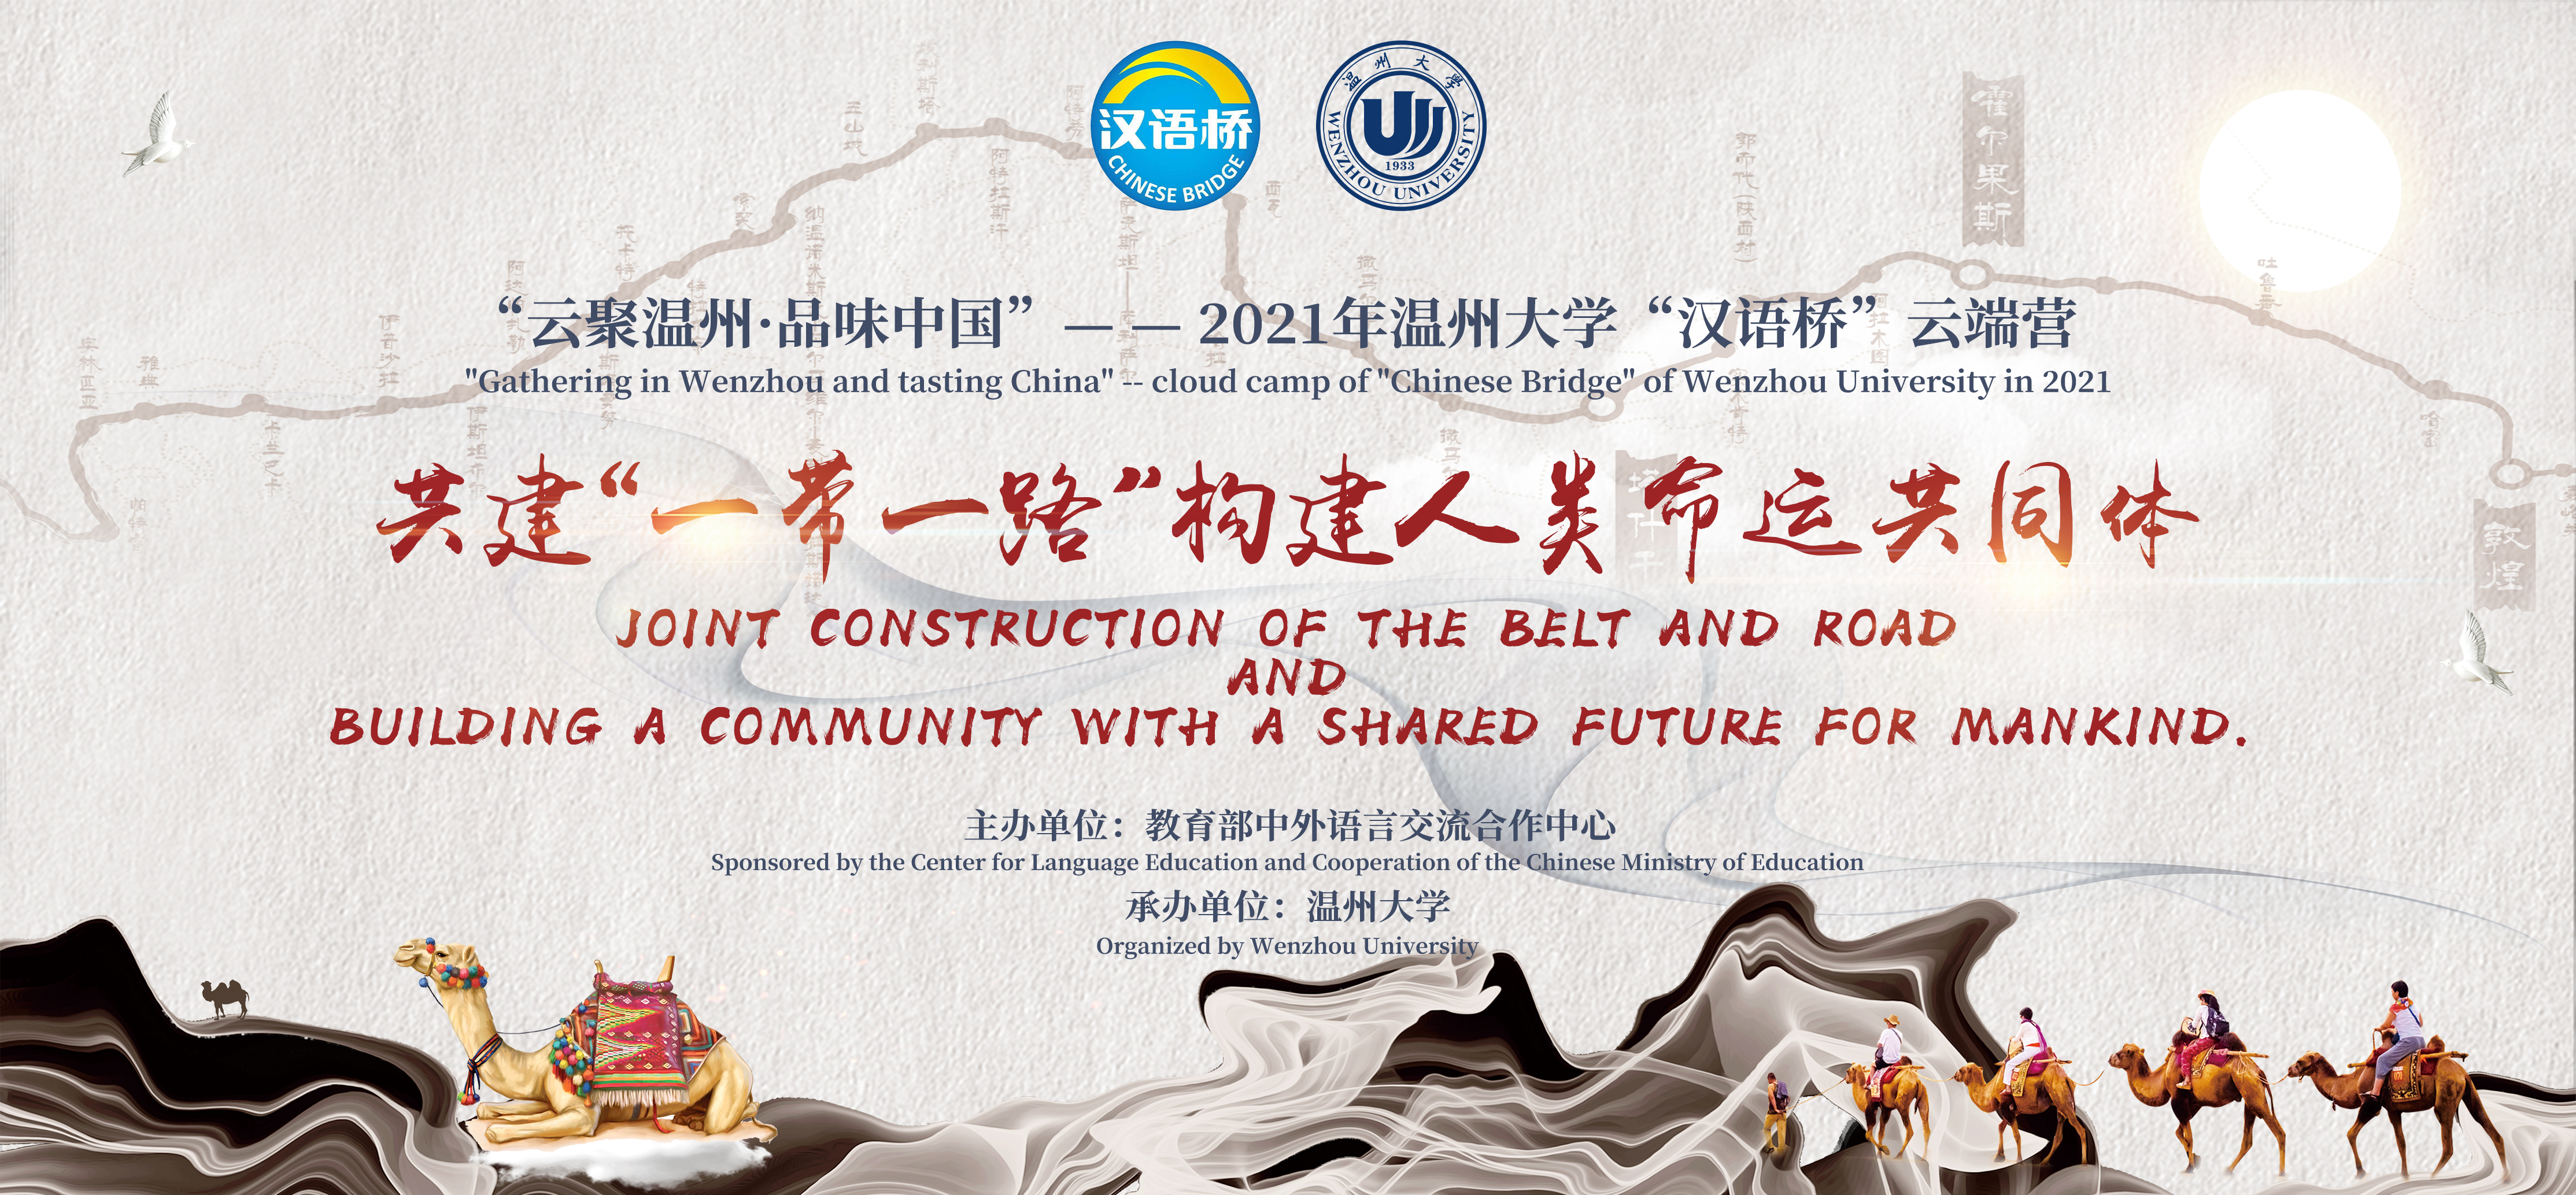 Jointly Committed to the “Belt and Road” Initiative and Built a Community of Shared Future for Human Beings